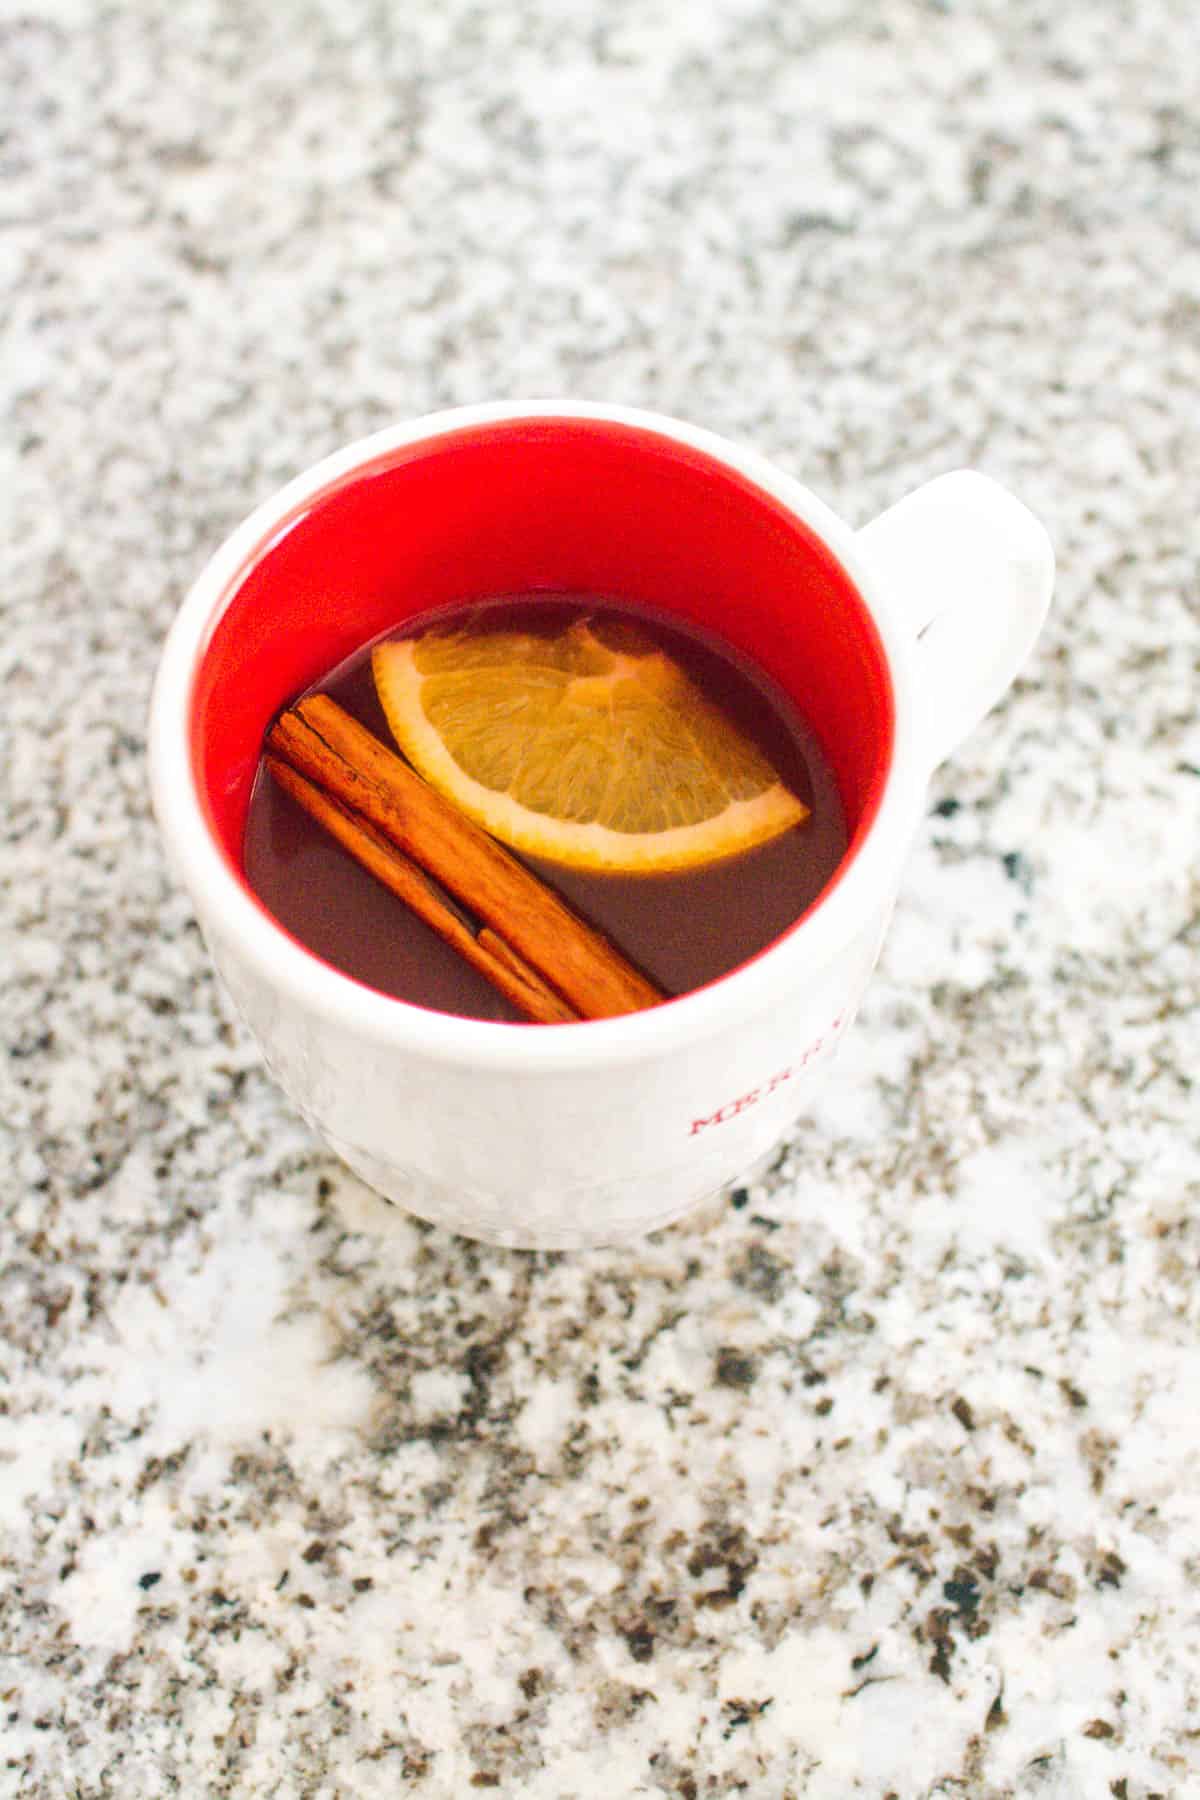 Overhead view of a mug holding a spiced cider.